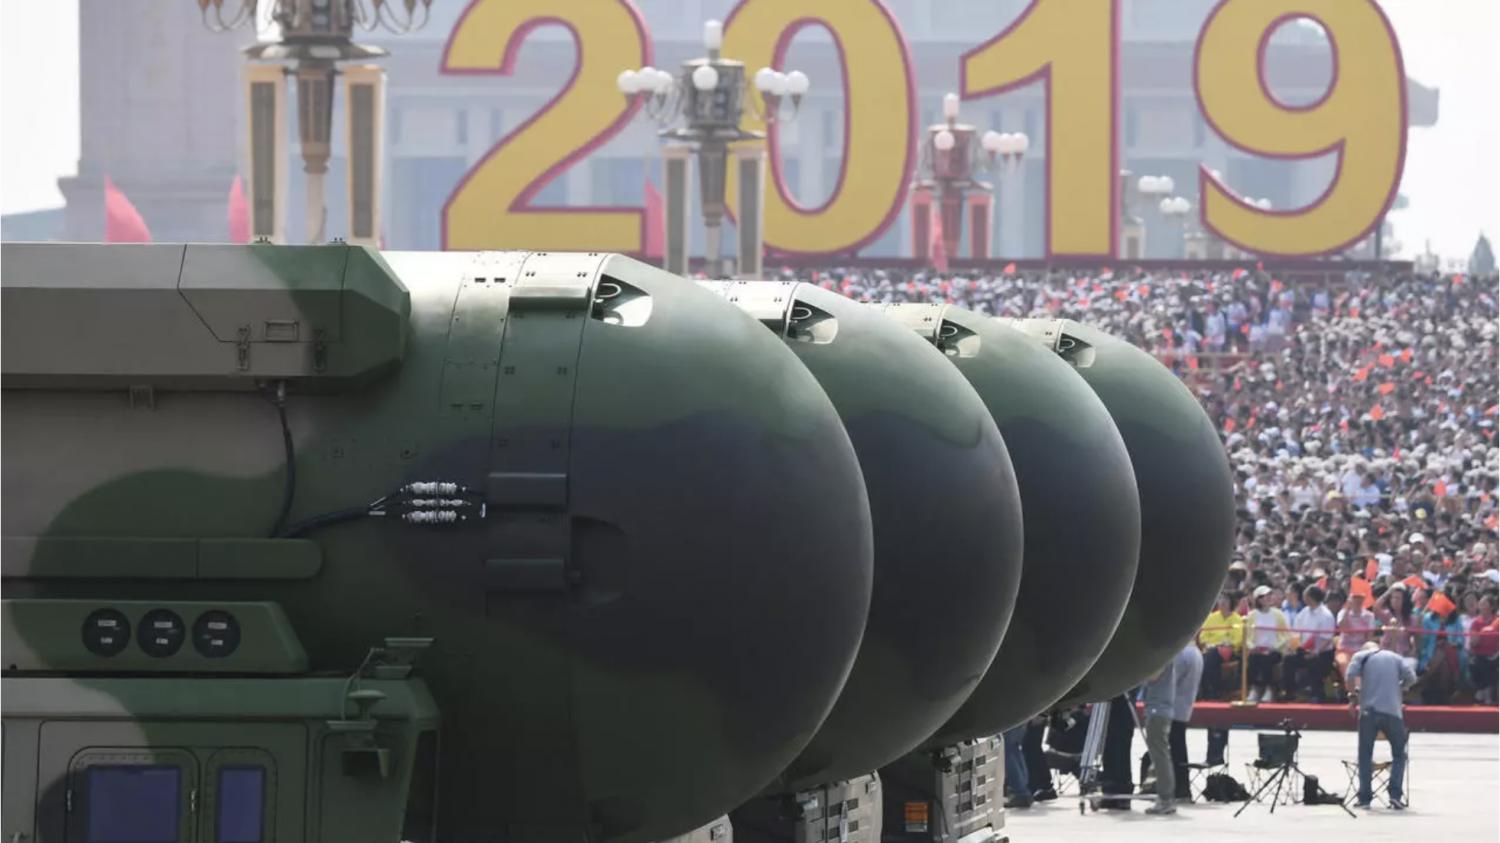 China's DF-41 nuclear-capable intercontinental ballistic missiles are seen during a military parade at Tiananmen Square in Beijing on October 1, 2019. China is among the countries that have not signed the UN treaty banning nuclear weapons. © Greg Bak